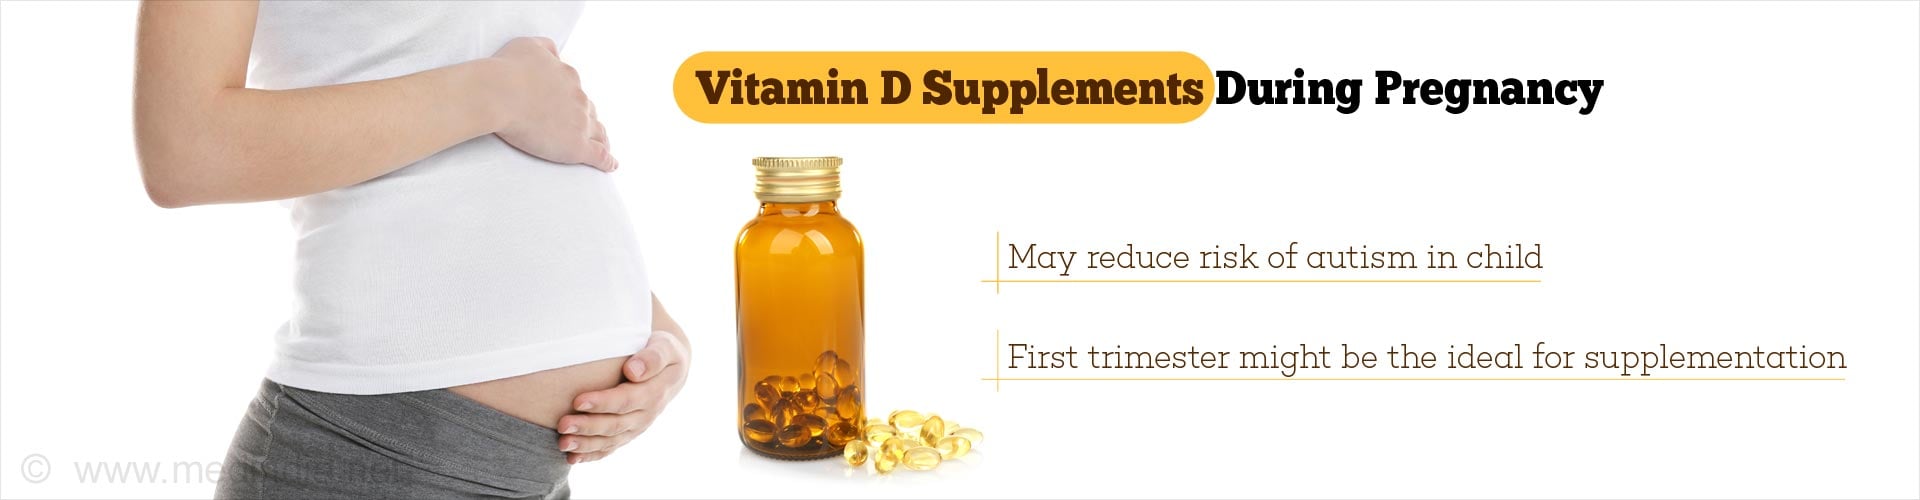 vitamin D supplements during pregnancy
- may reduce risk of autism in child
- first trimester might be the ideal for supplementation